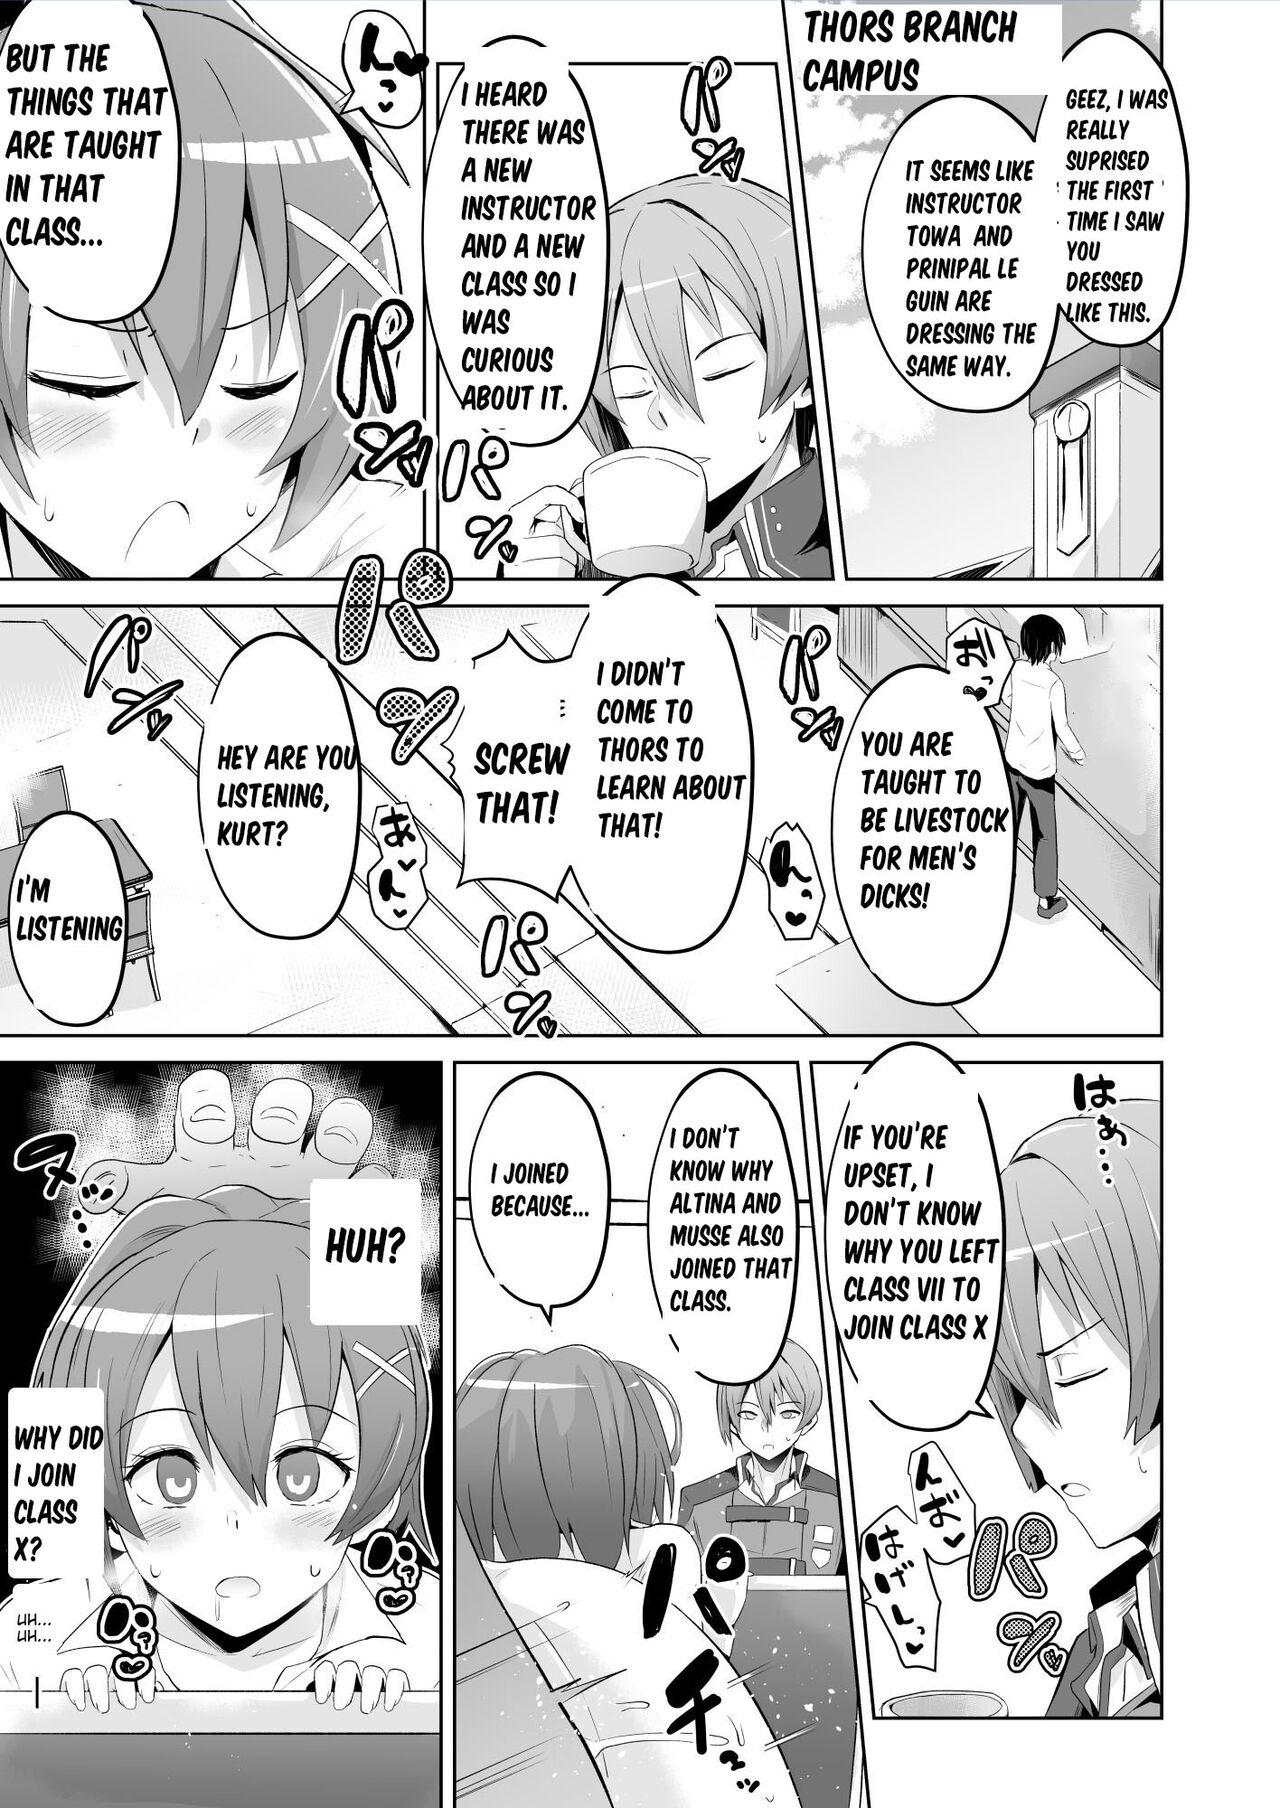 Gaygroup Hypnosis of the New Class VII - Juna's Report - The legend of heroes | eiyuu densetsu Funny - Page 1